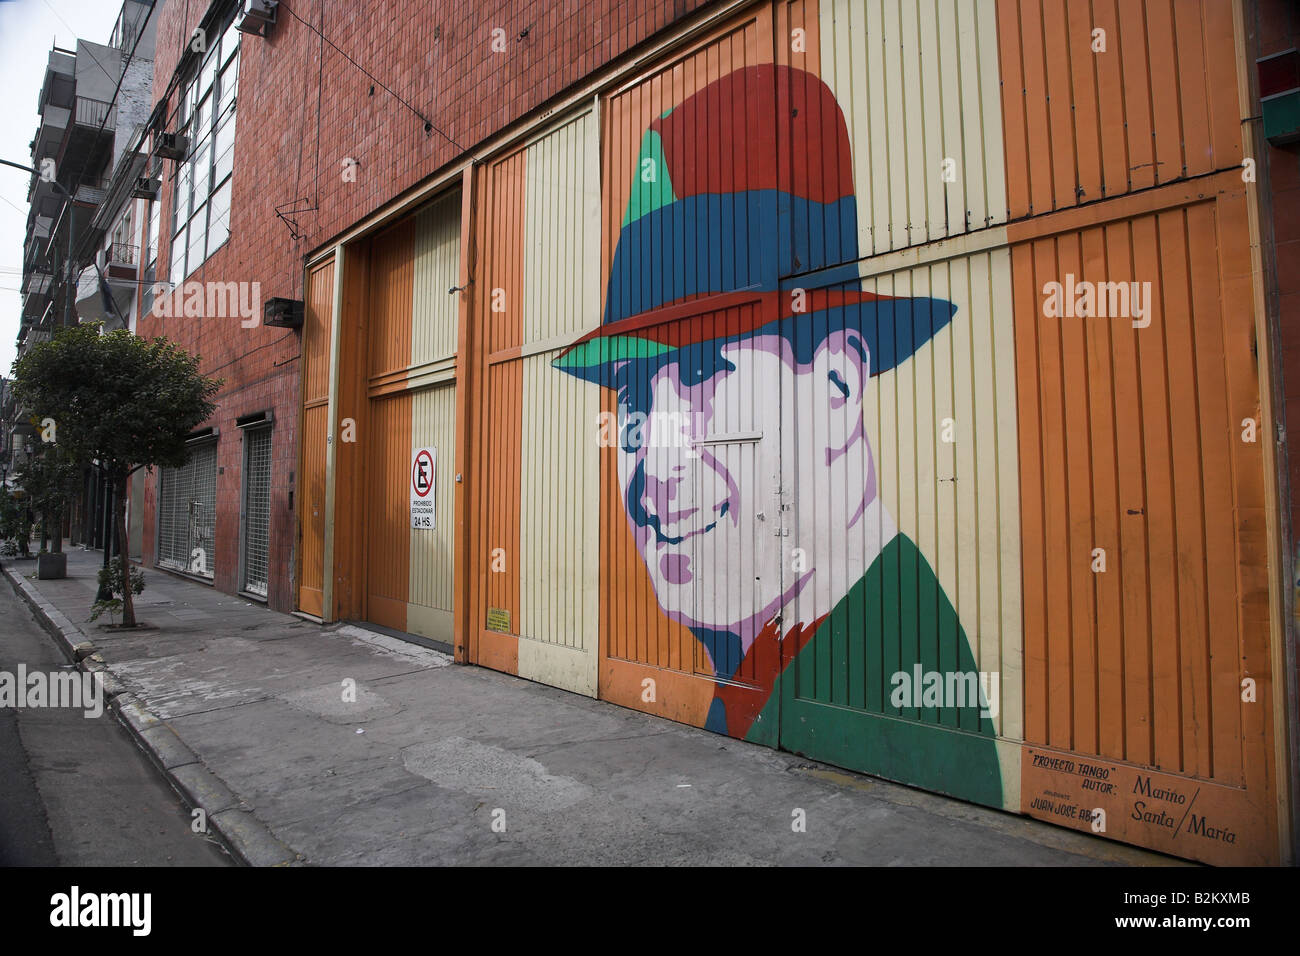 Street painting of famous tango singer, Carlos Gardel in the Abasto area of Buenos Aires in Argentina Stock Photo